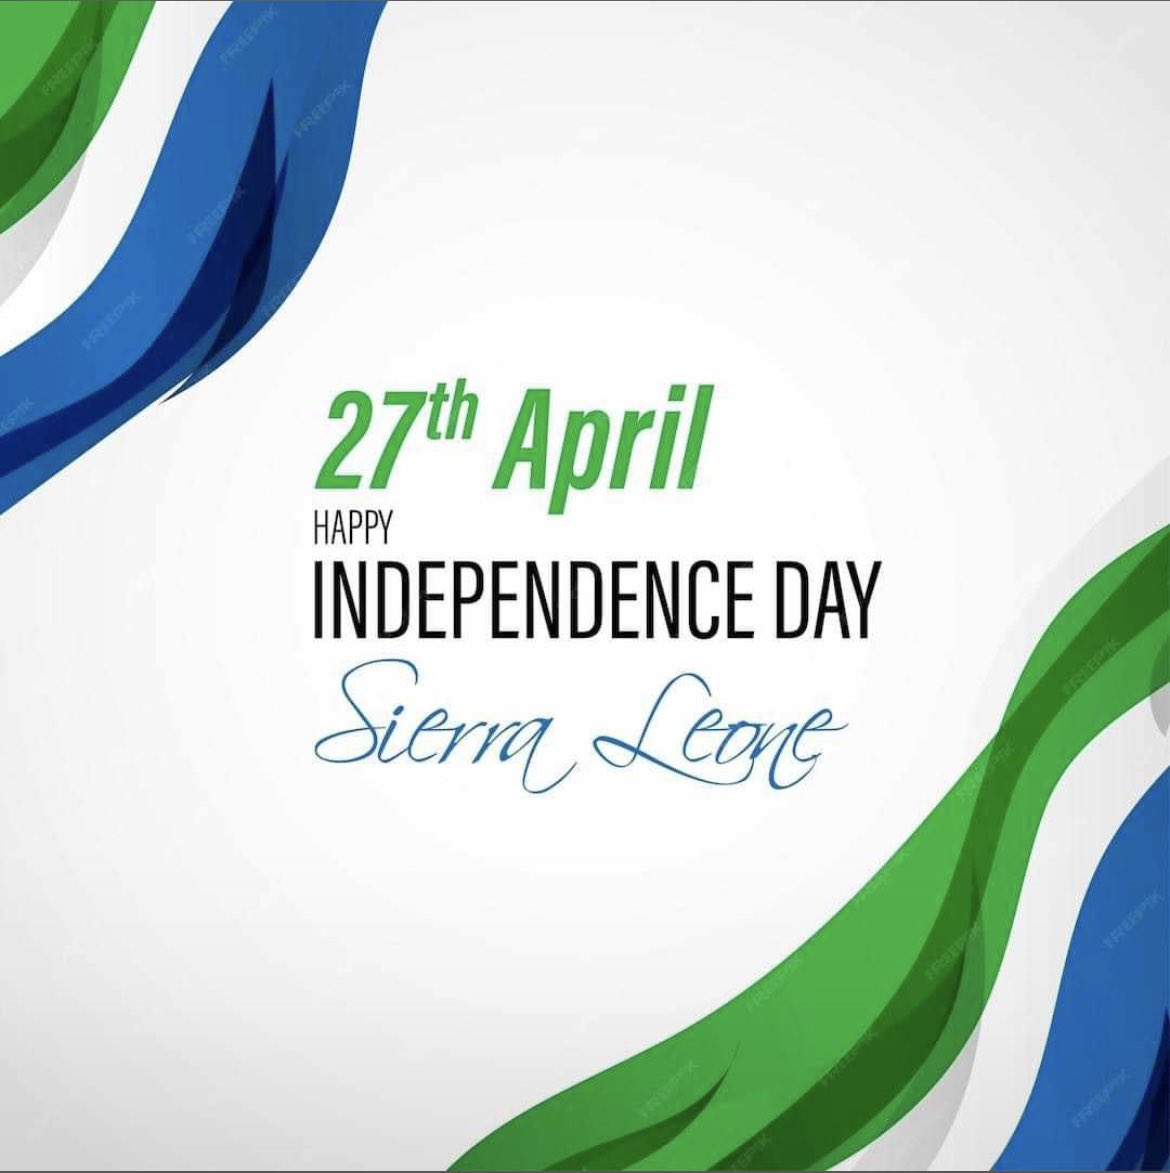 Happy #IndependenceDay to my beautiful country #SierraLeone🇸🇱. 
High we exalt thee, realm of the free; Great is the love we have for thee; Firmly united ever we stand,
Singing thy praise, O native land.
We raise up our hearts and our voices on high, The hills and the valleys